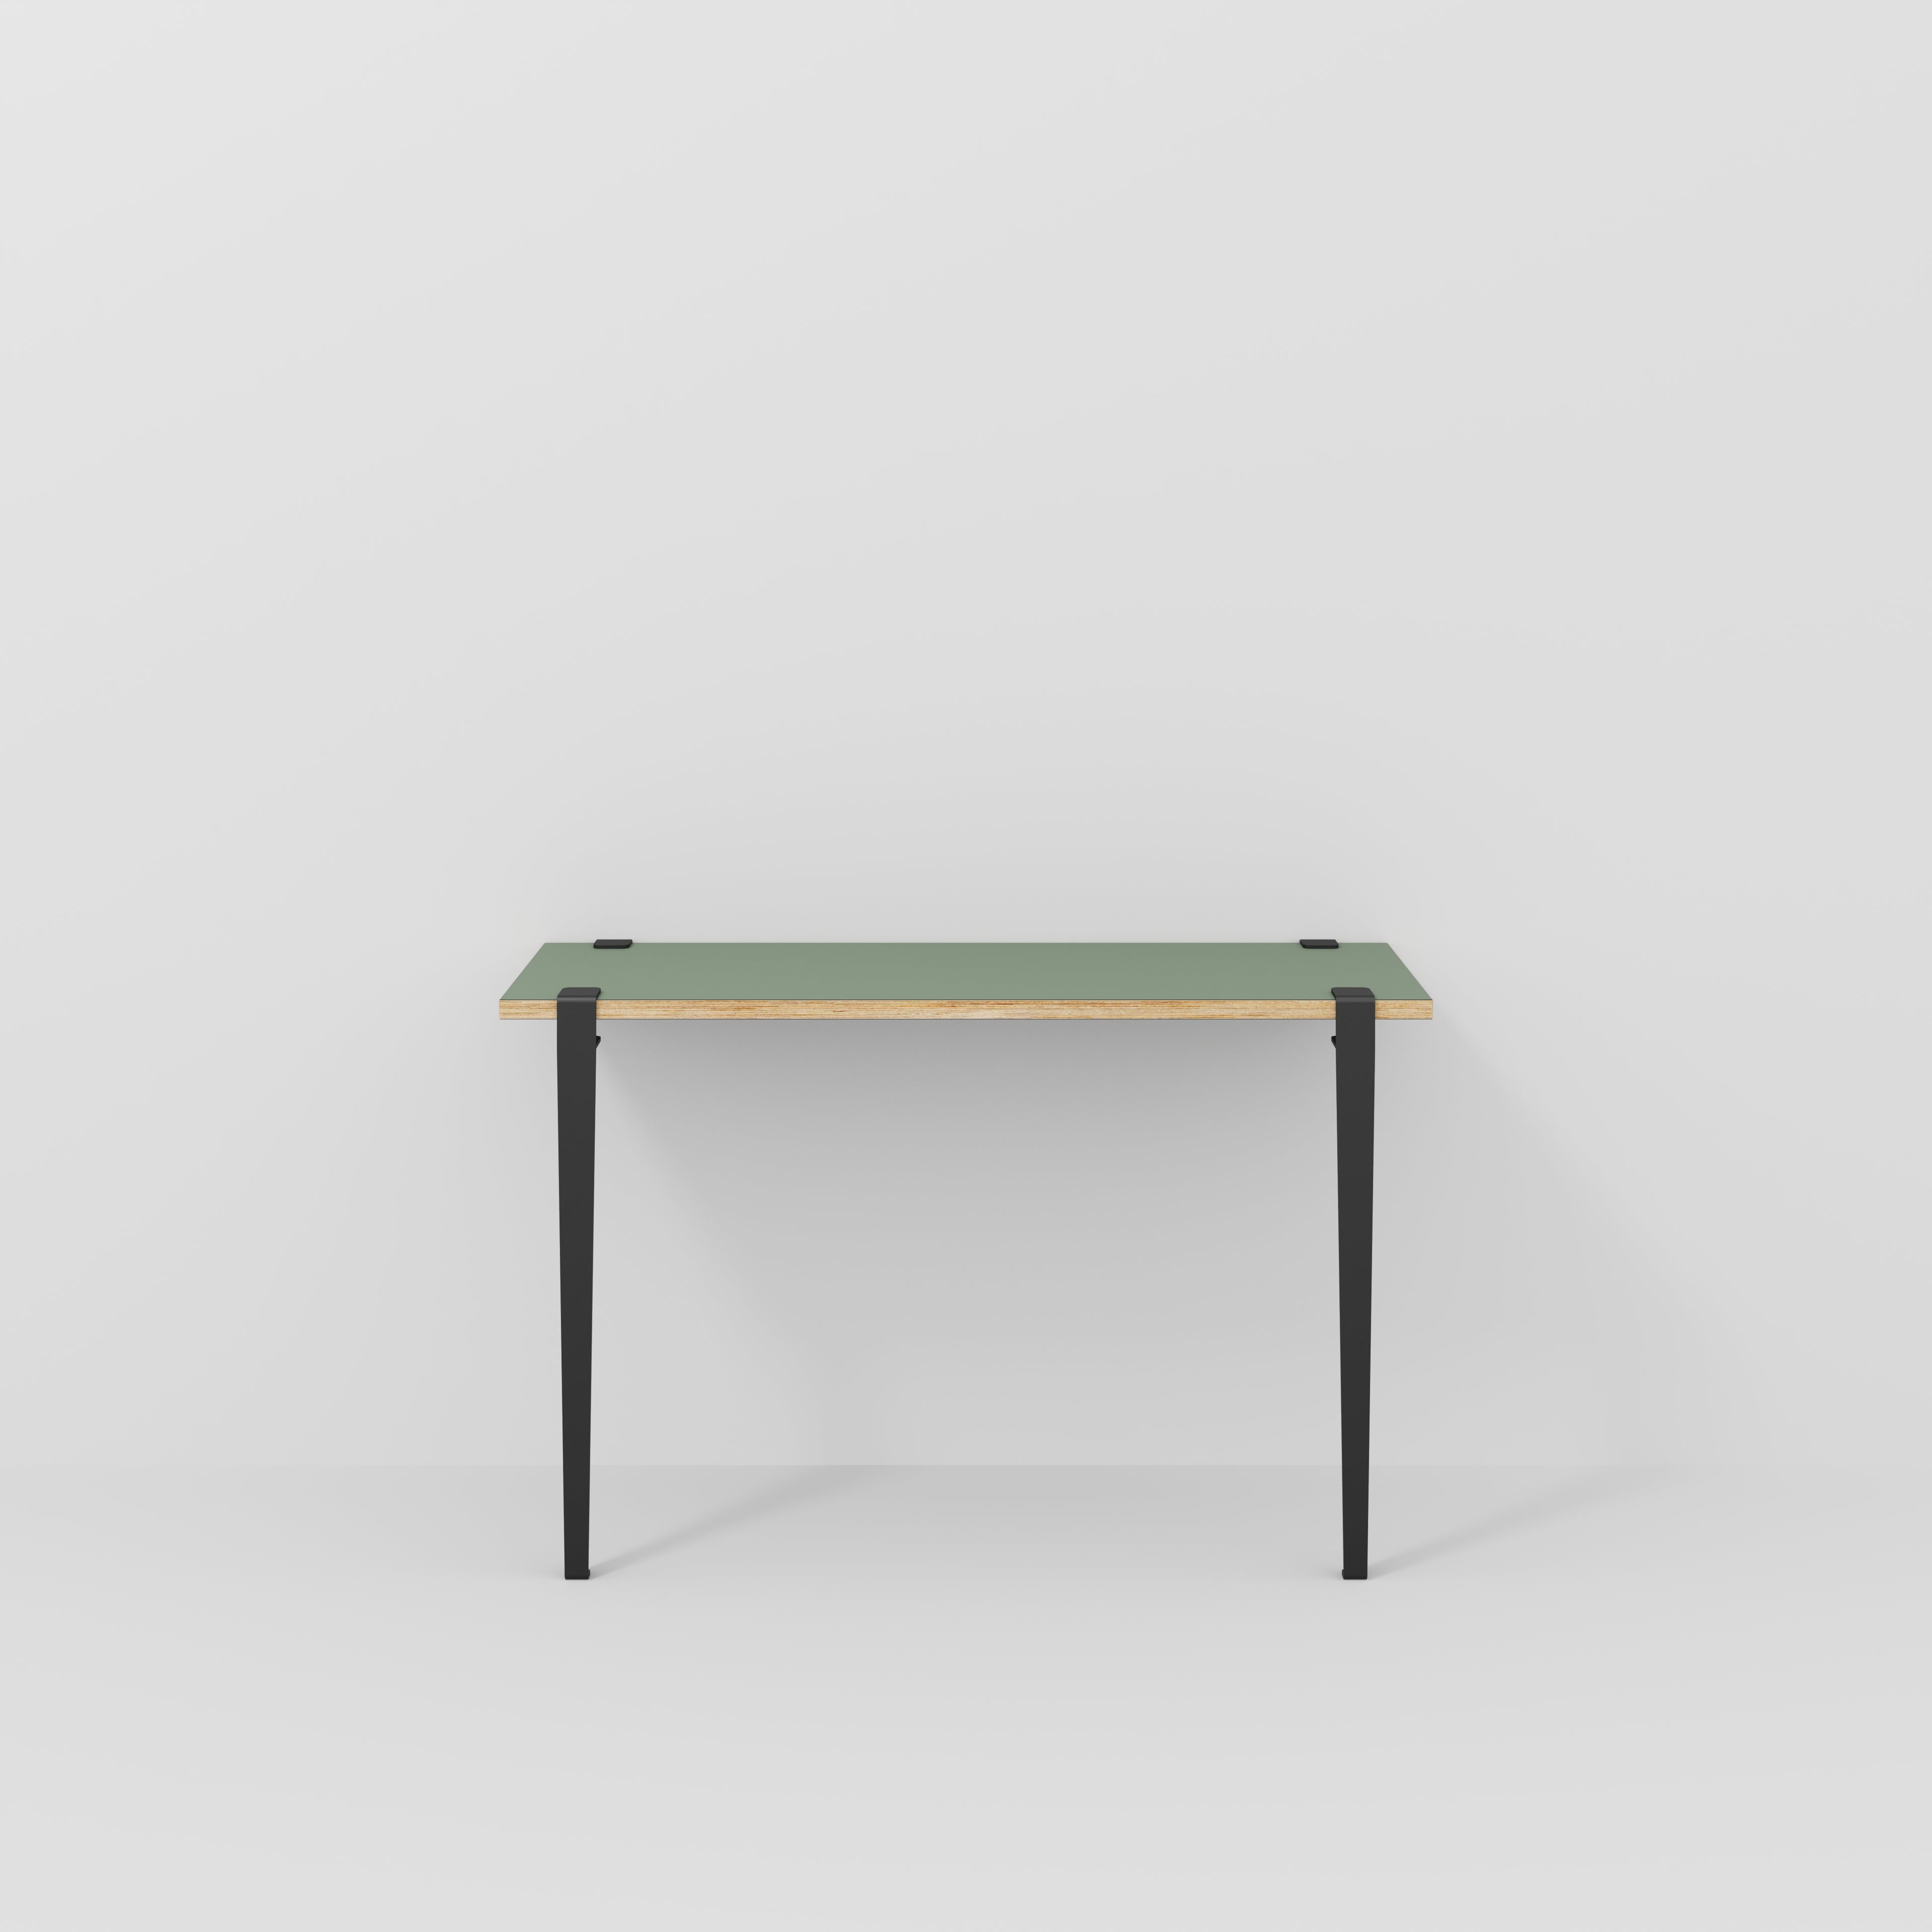 Wall Desk with Black Tiptoe Legs and Brackets - Formica Green Slate - 1200(w) x 400(d) x 750(h)